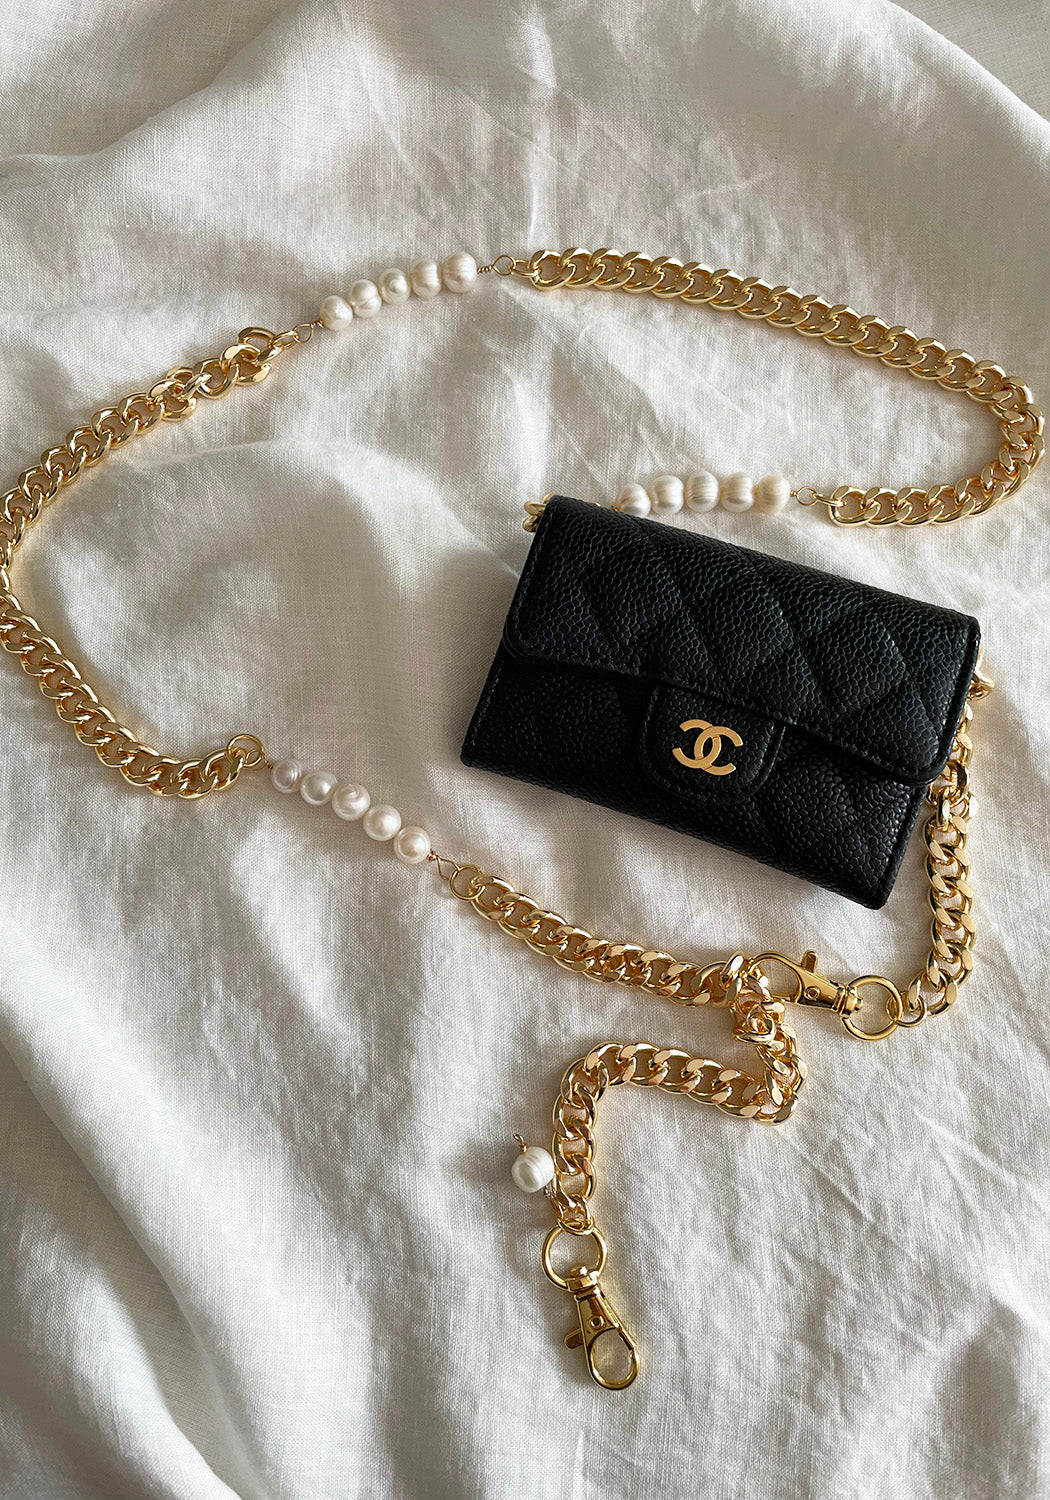 CHANEL, Accessories, Authentic Coco Chanel Belt